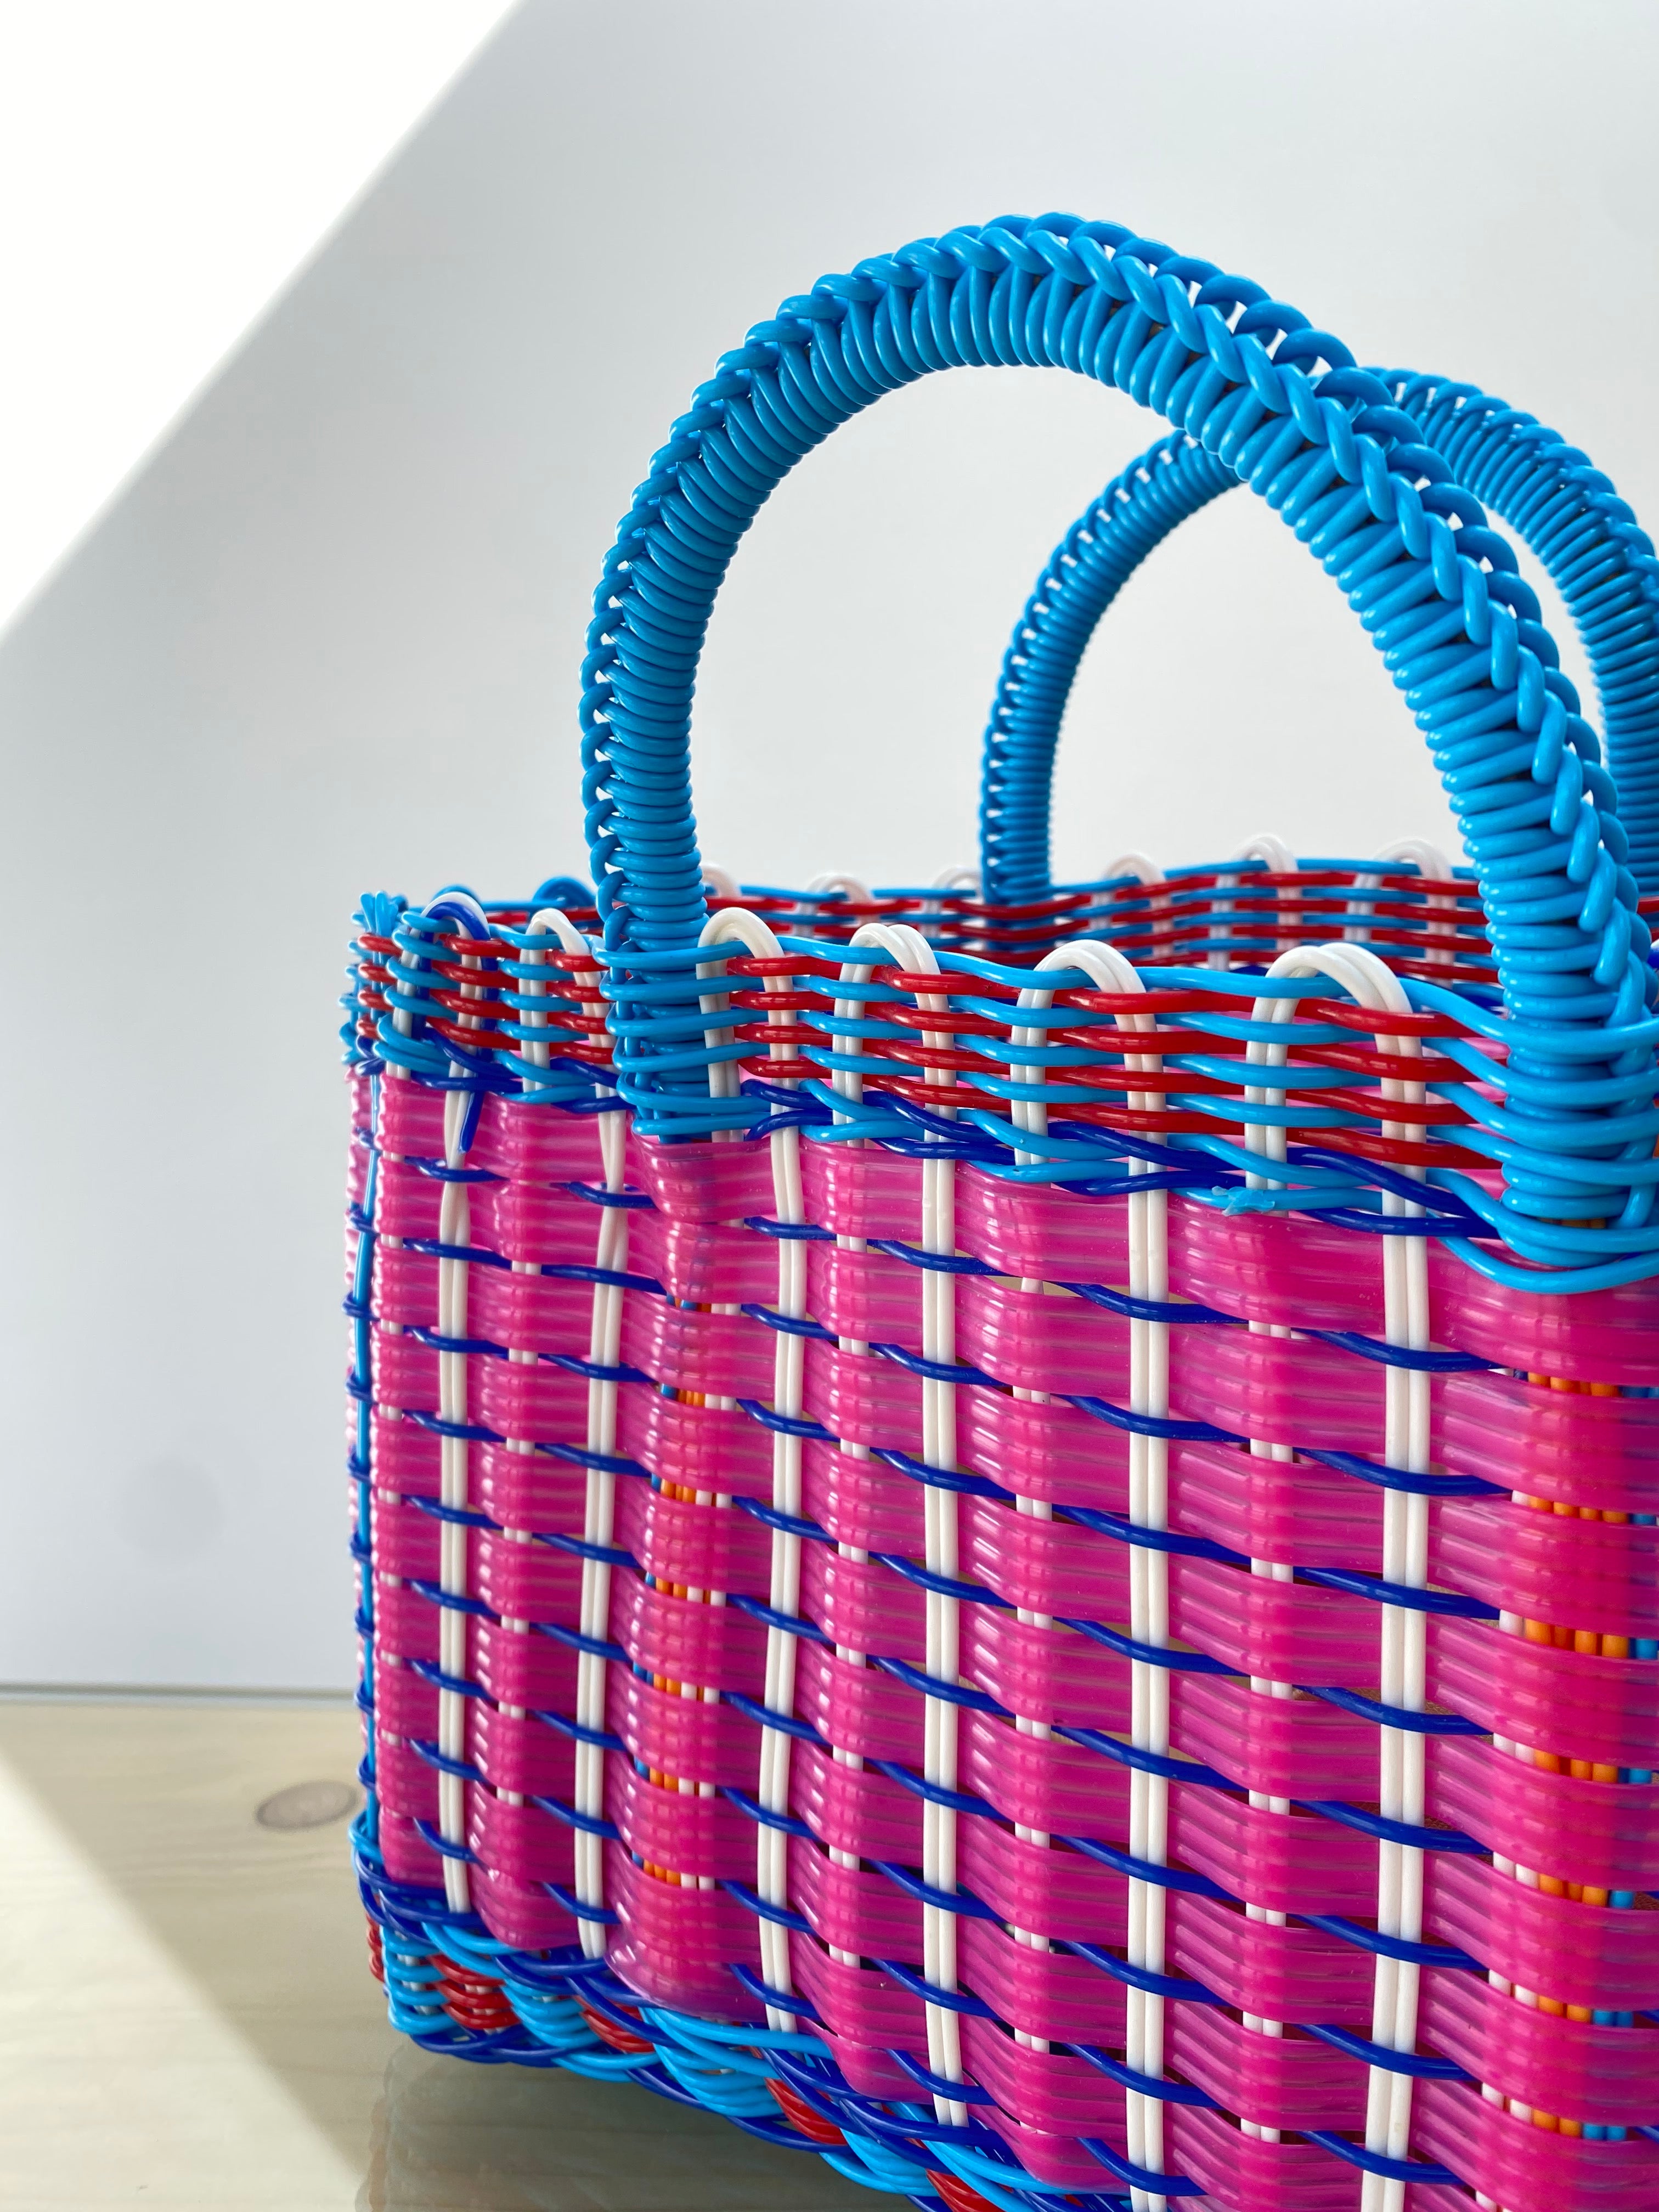 Emone Market Bag in Mexican Pink and Blue - Small